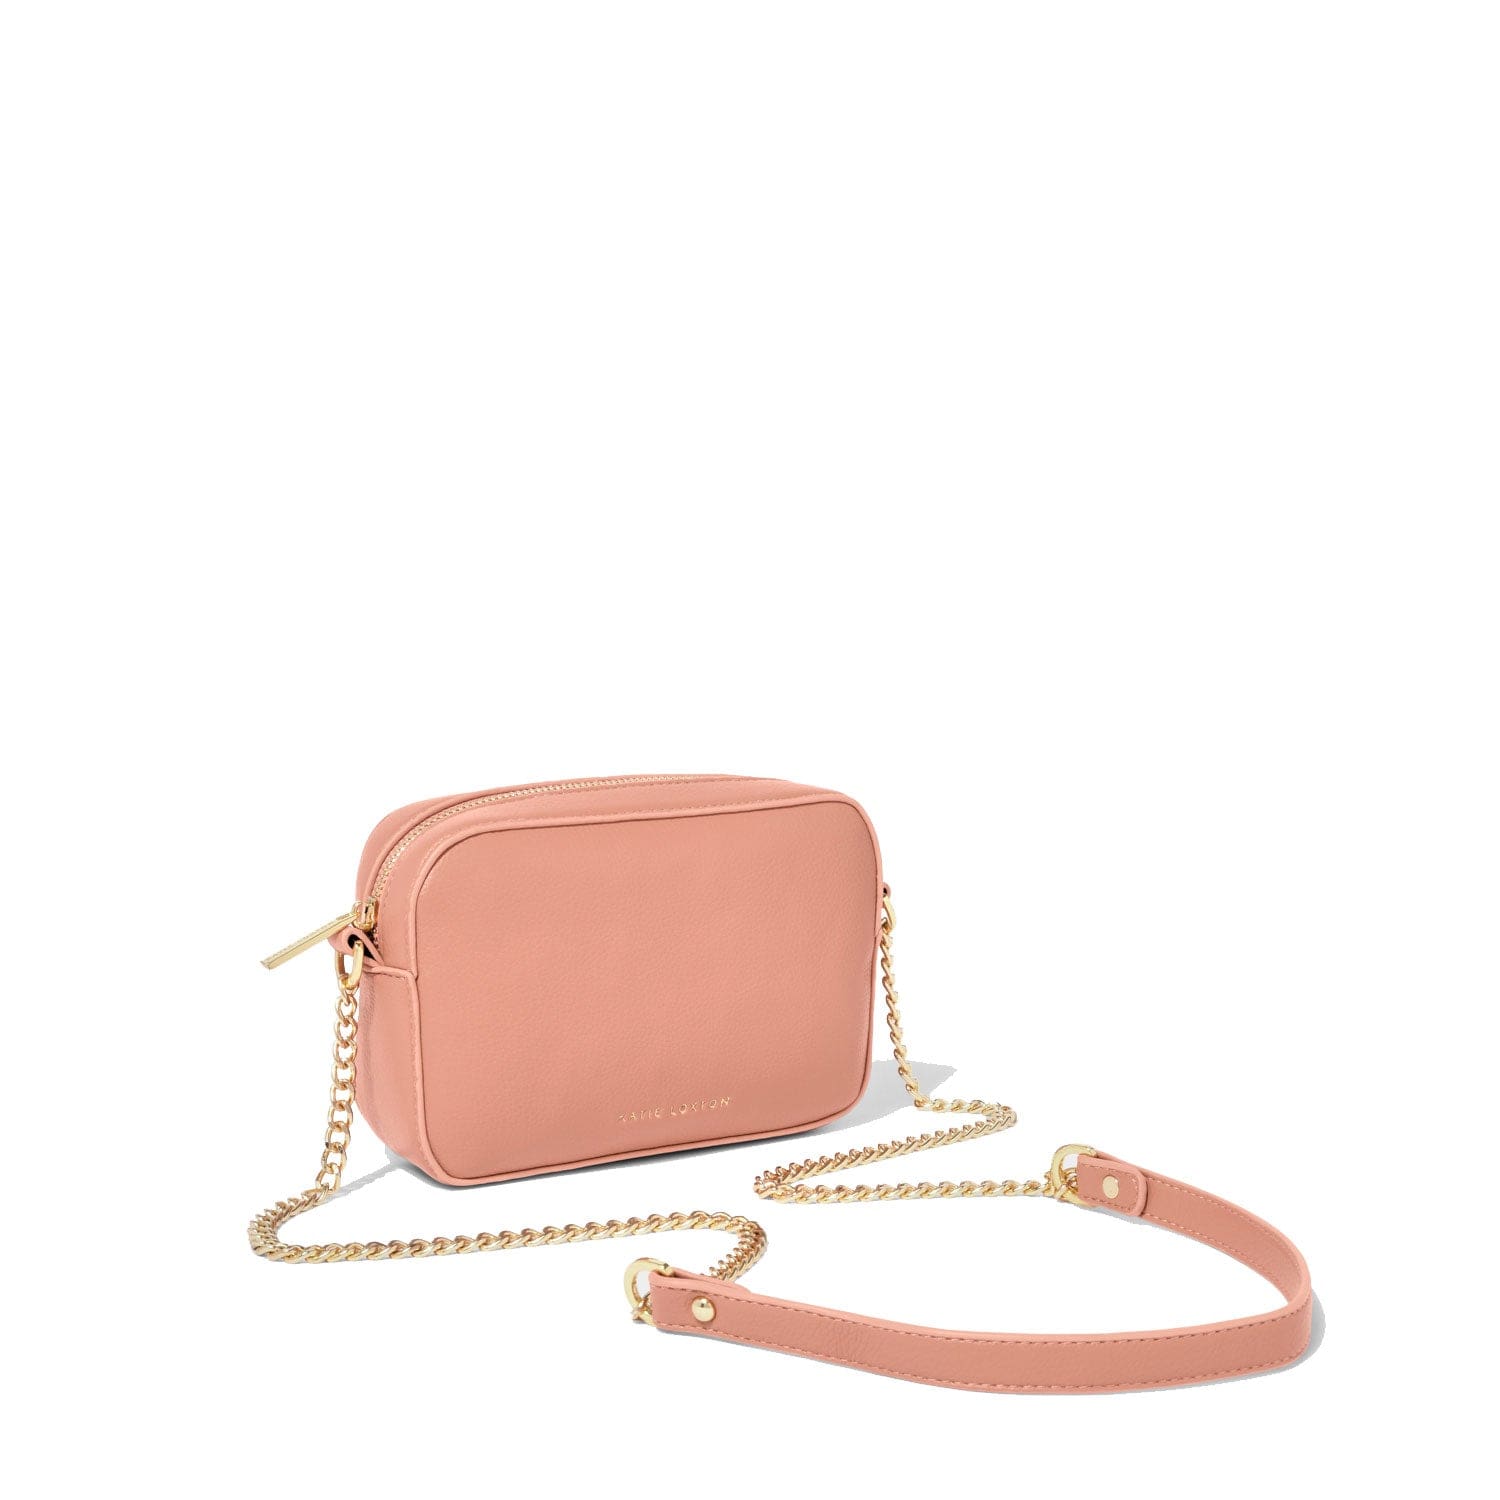 Katie Loxton Crossbody Bag Coral Katie Loxton Millie Mini Crossbody Bag - Navy / Off White / Olive / Soft Tan / Lilac / Coral